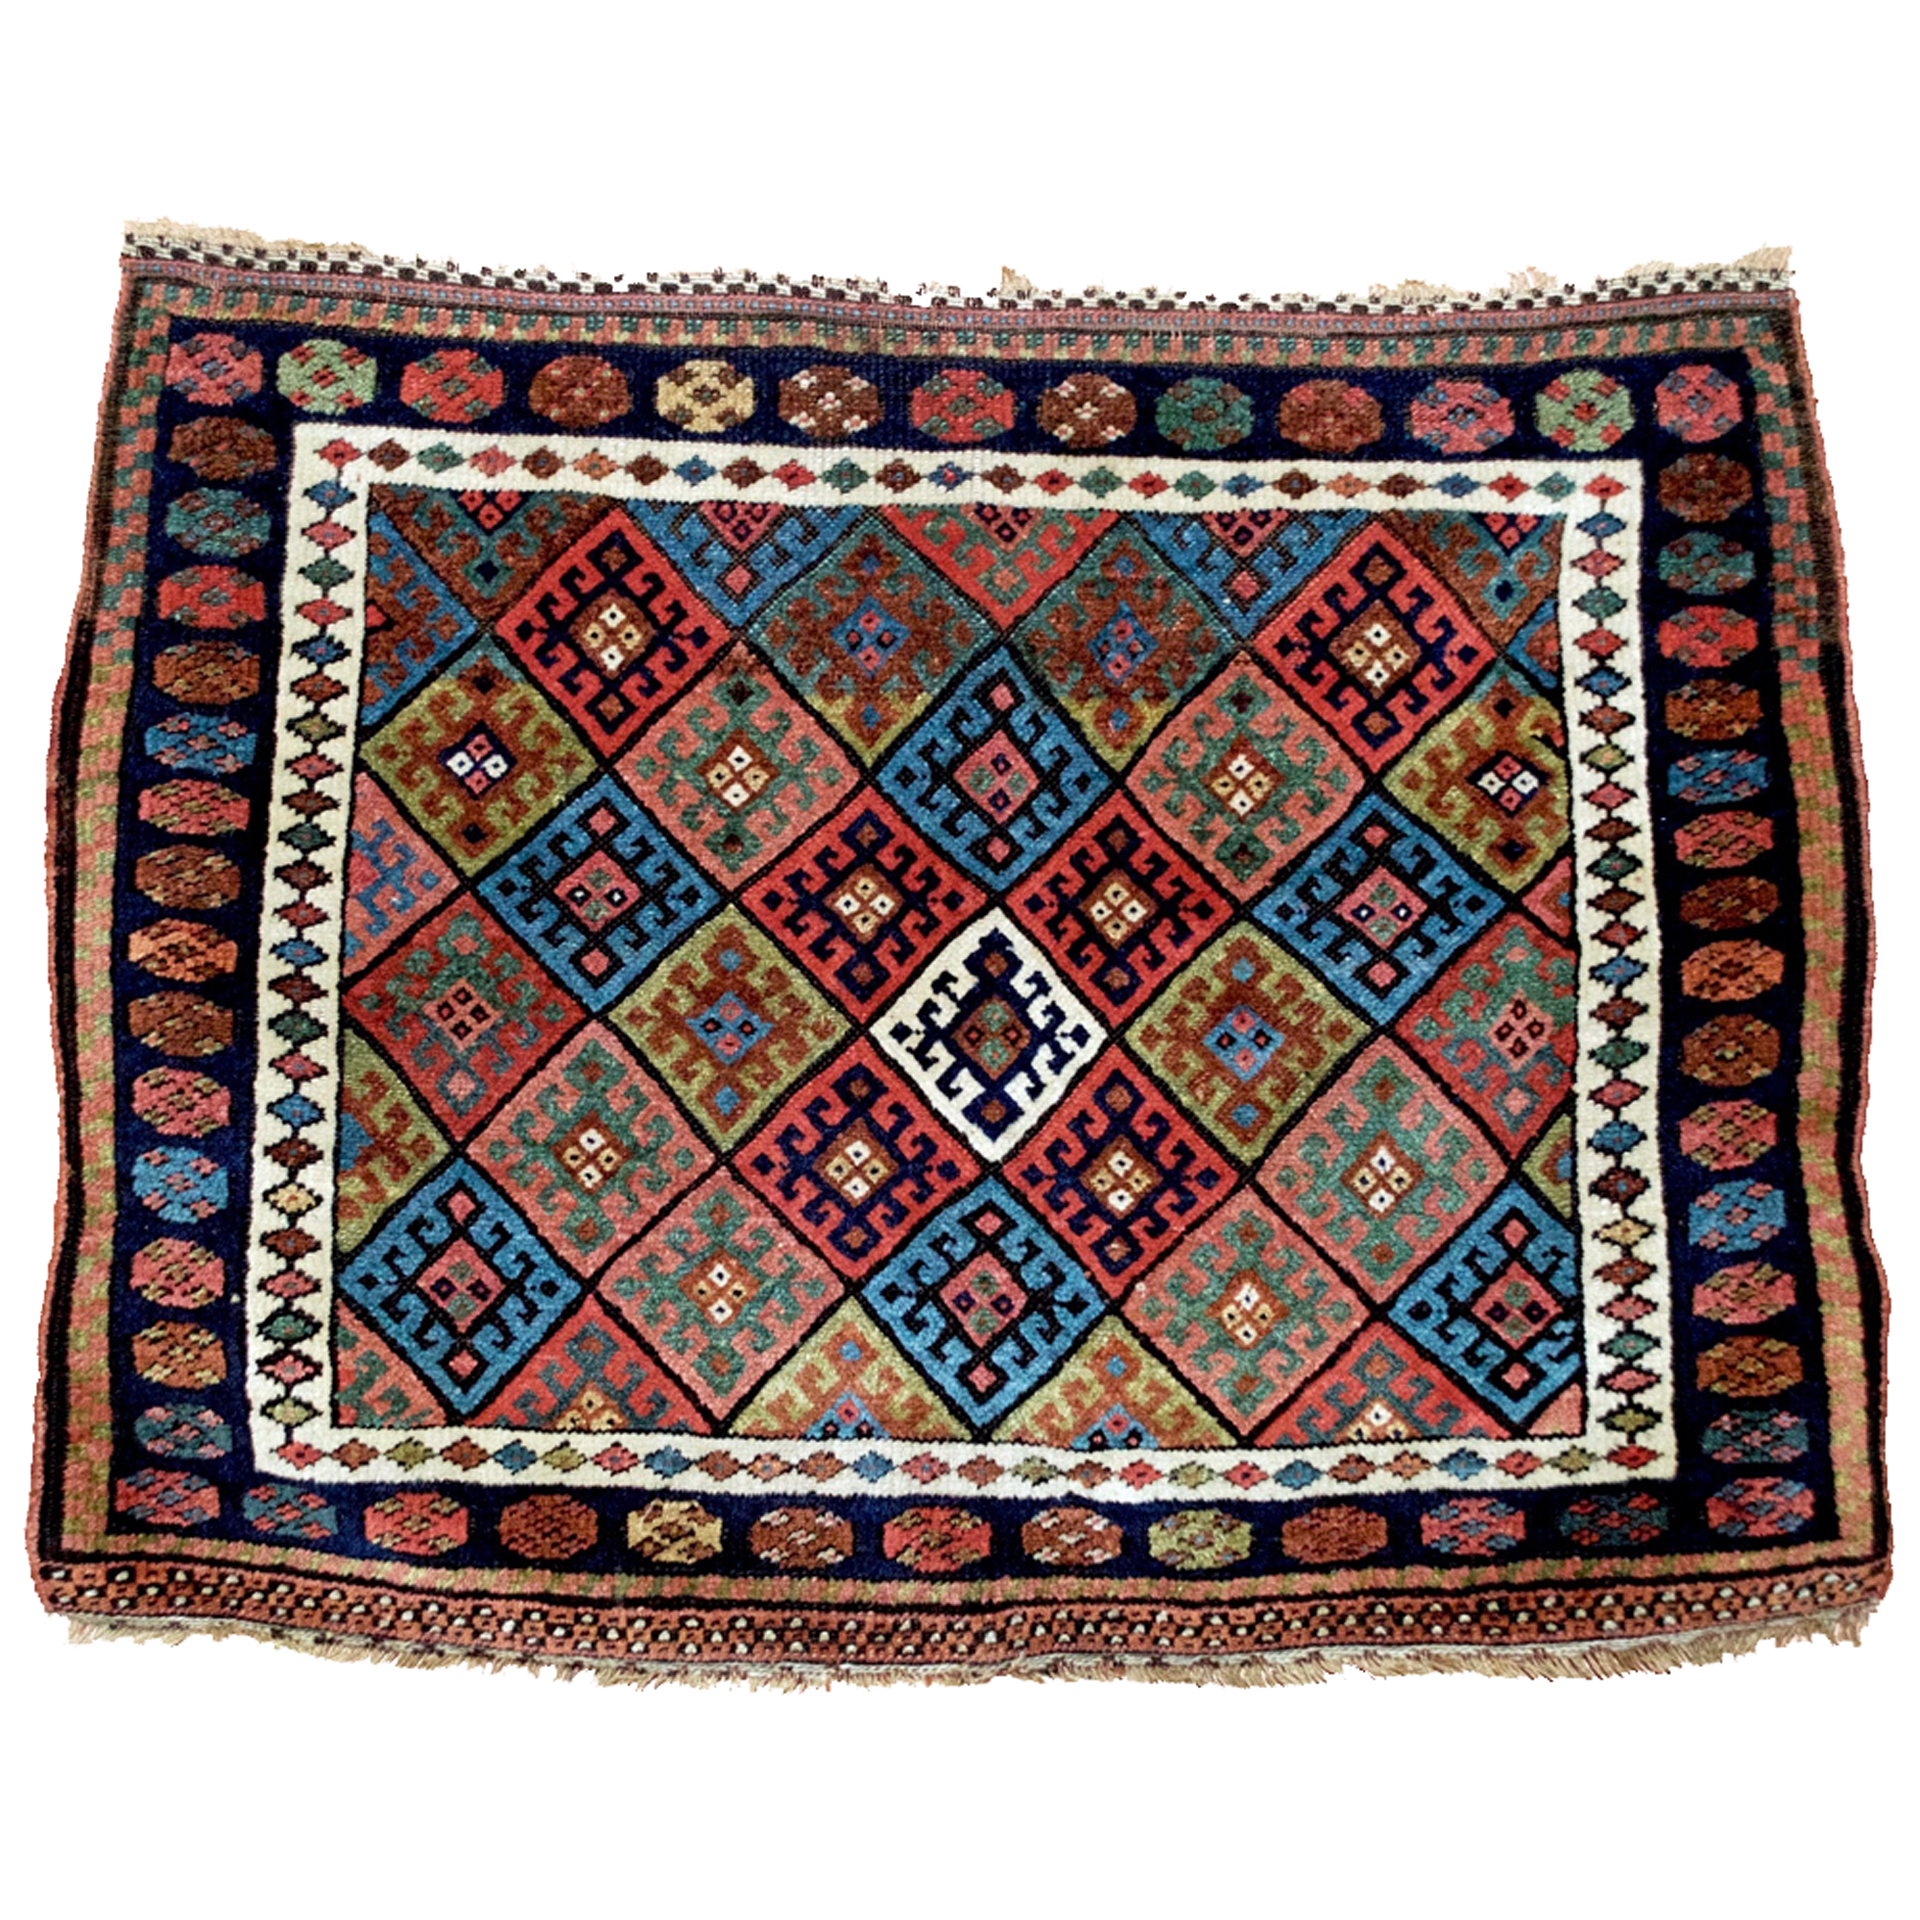 A large antique northwest Persian Kurdish bagface with the classic diamond design - Douglas Stock Gallery antique Oriental rug research archives